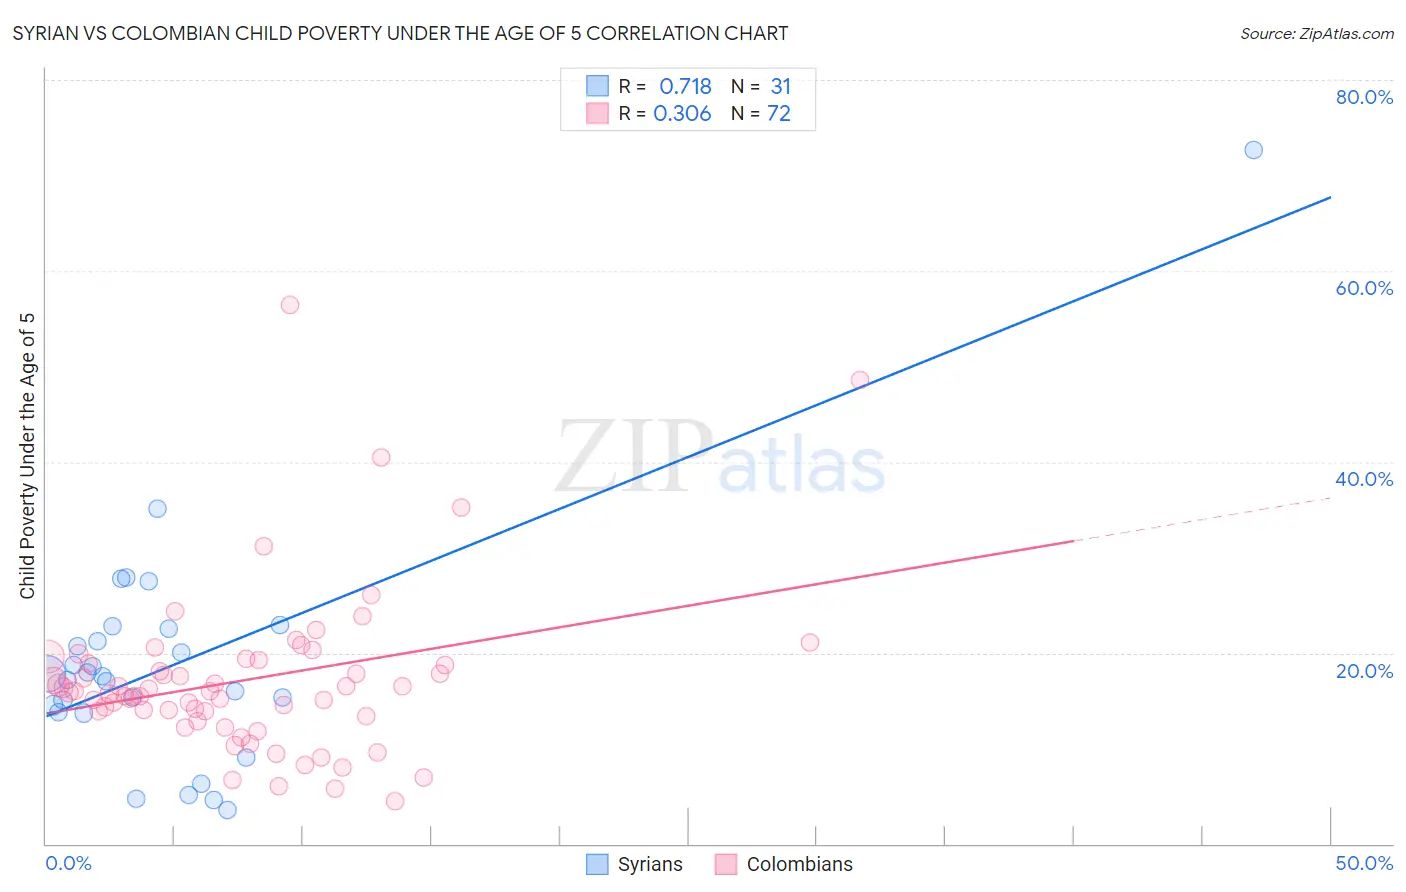 Syrian vs Colombian Child Poverty Under the Age of 5